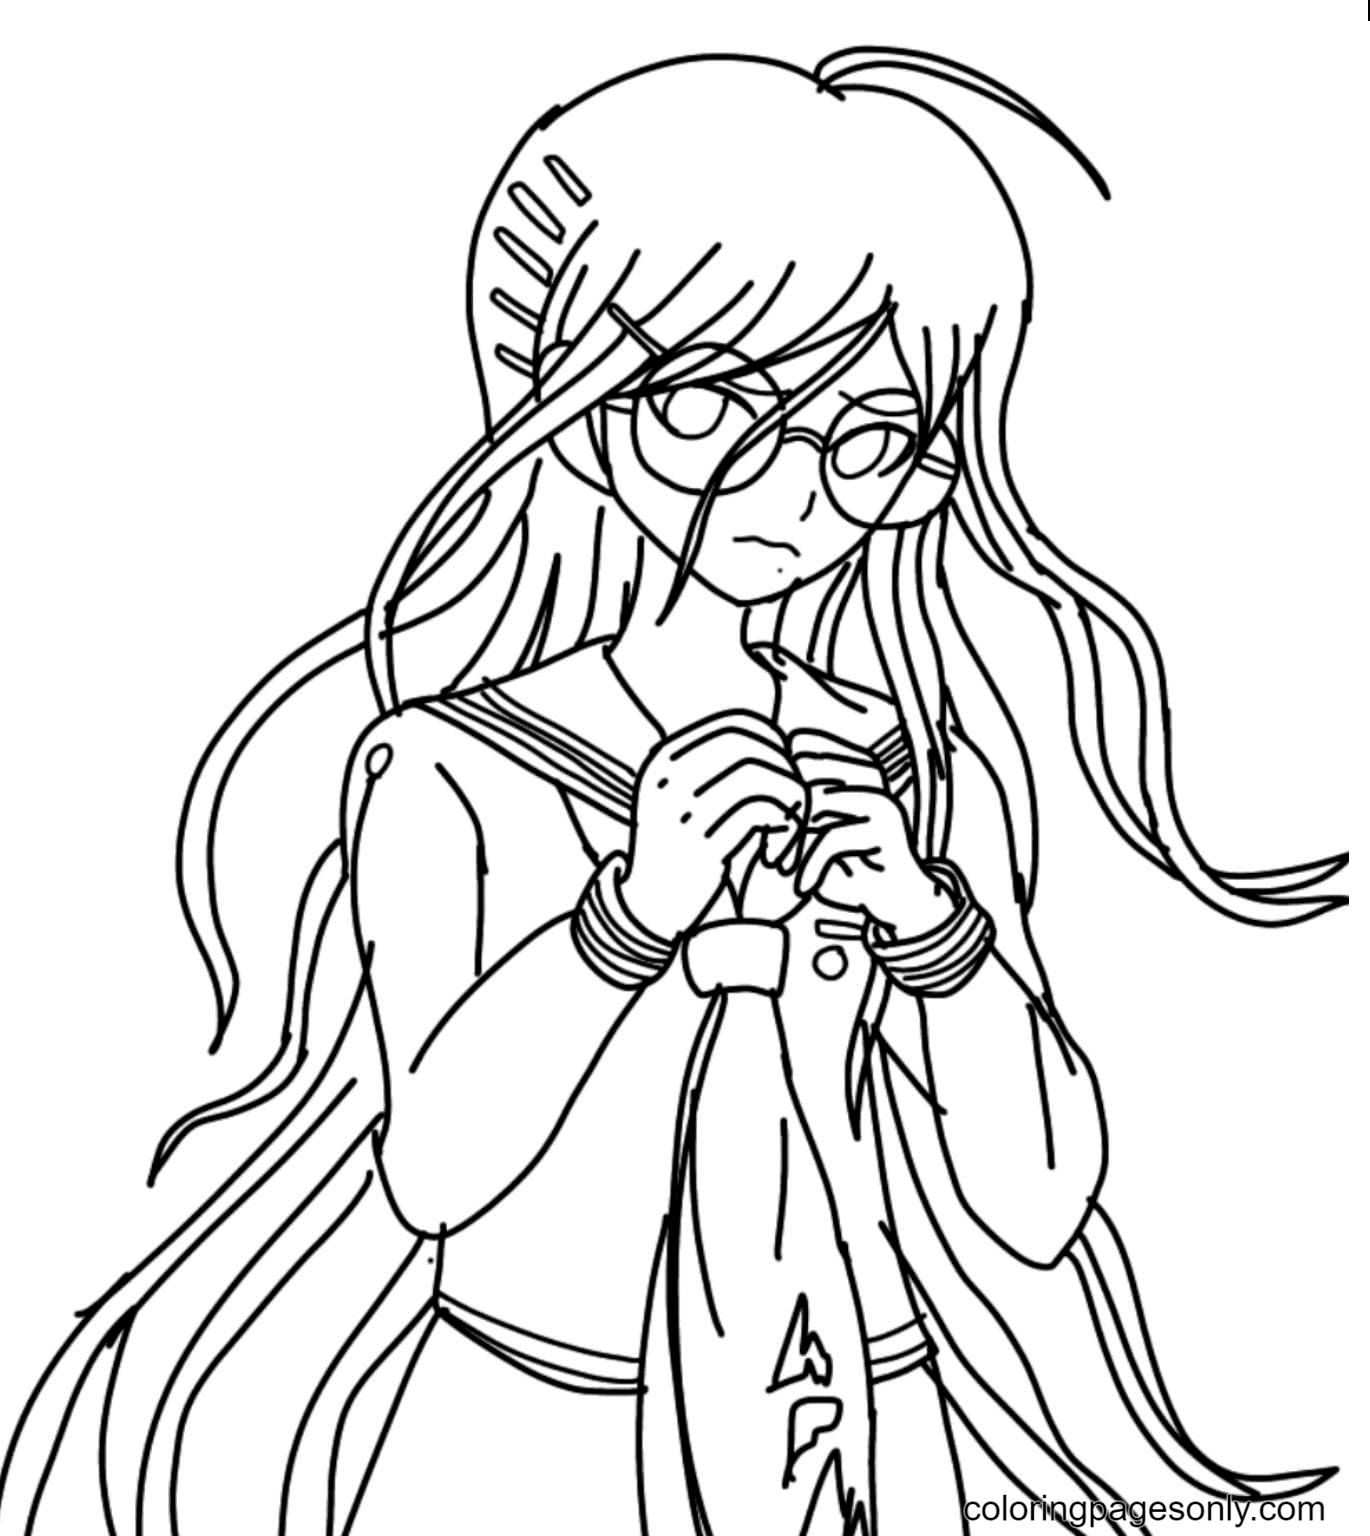 Girl from Dangan Ronpa Coloring Pages